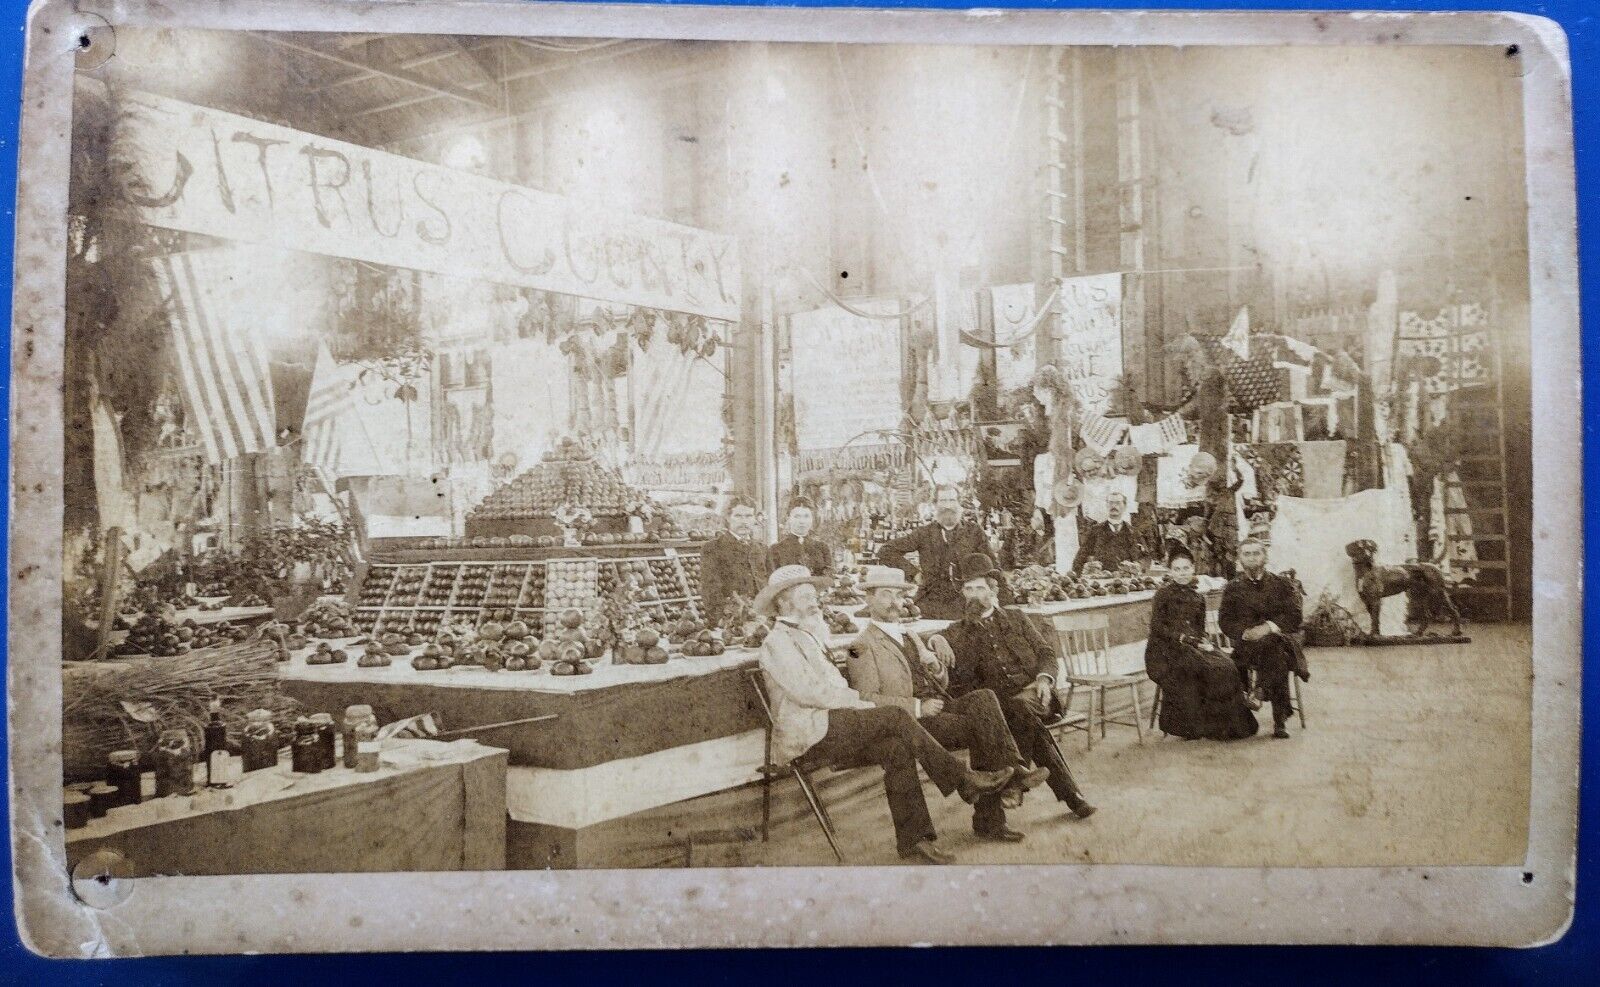 1890 AGRICULTURAL ALLIANCE EXPOSITION IN OCALA FL CITRUS COUNTY EXHIBIT